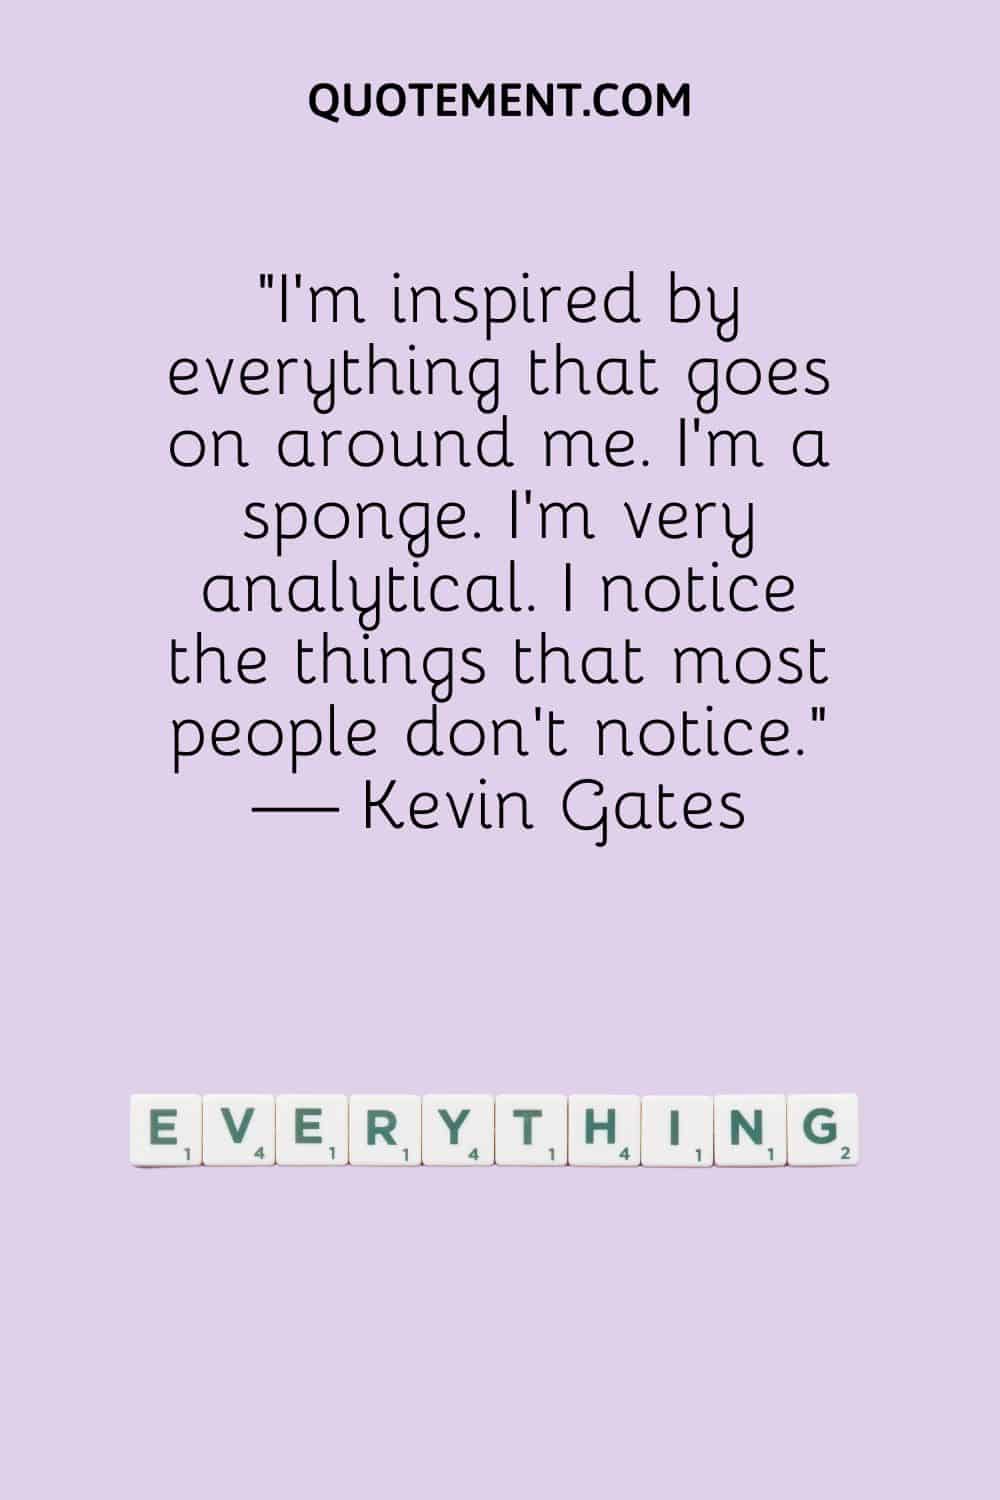 I’m inspired by everything that goes on around me.